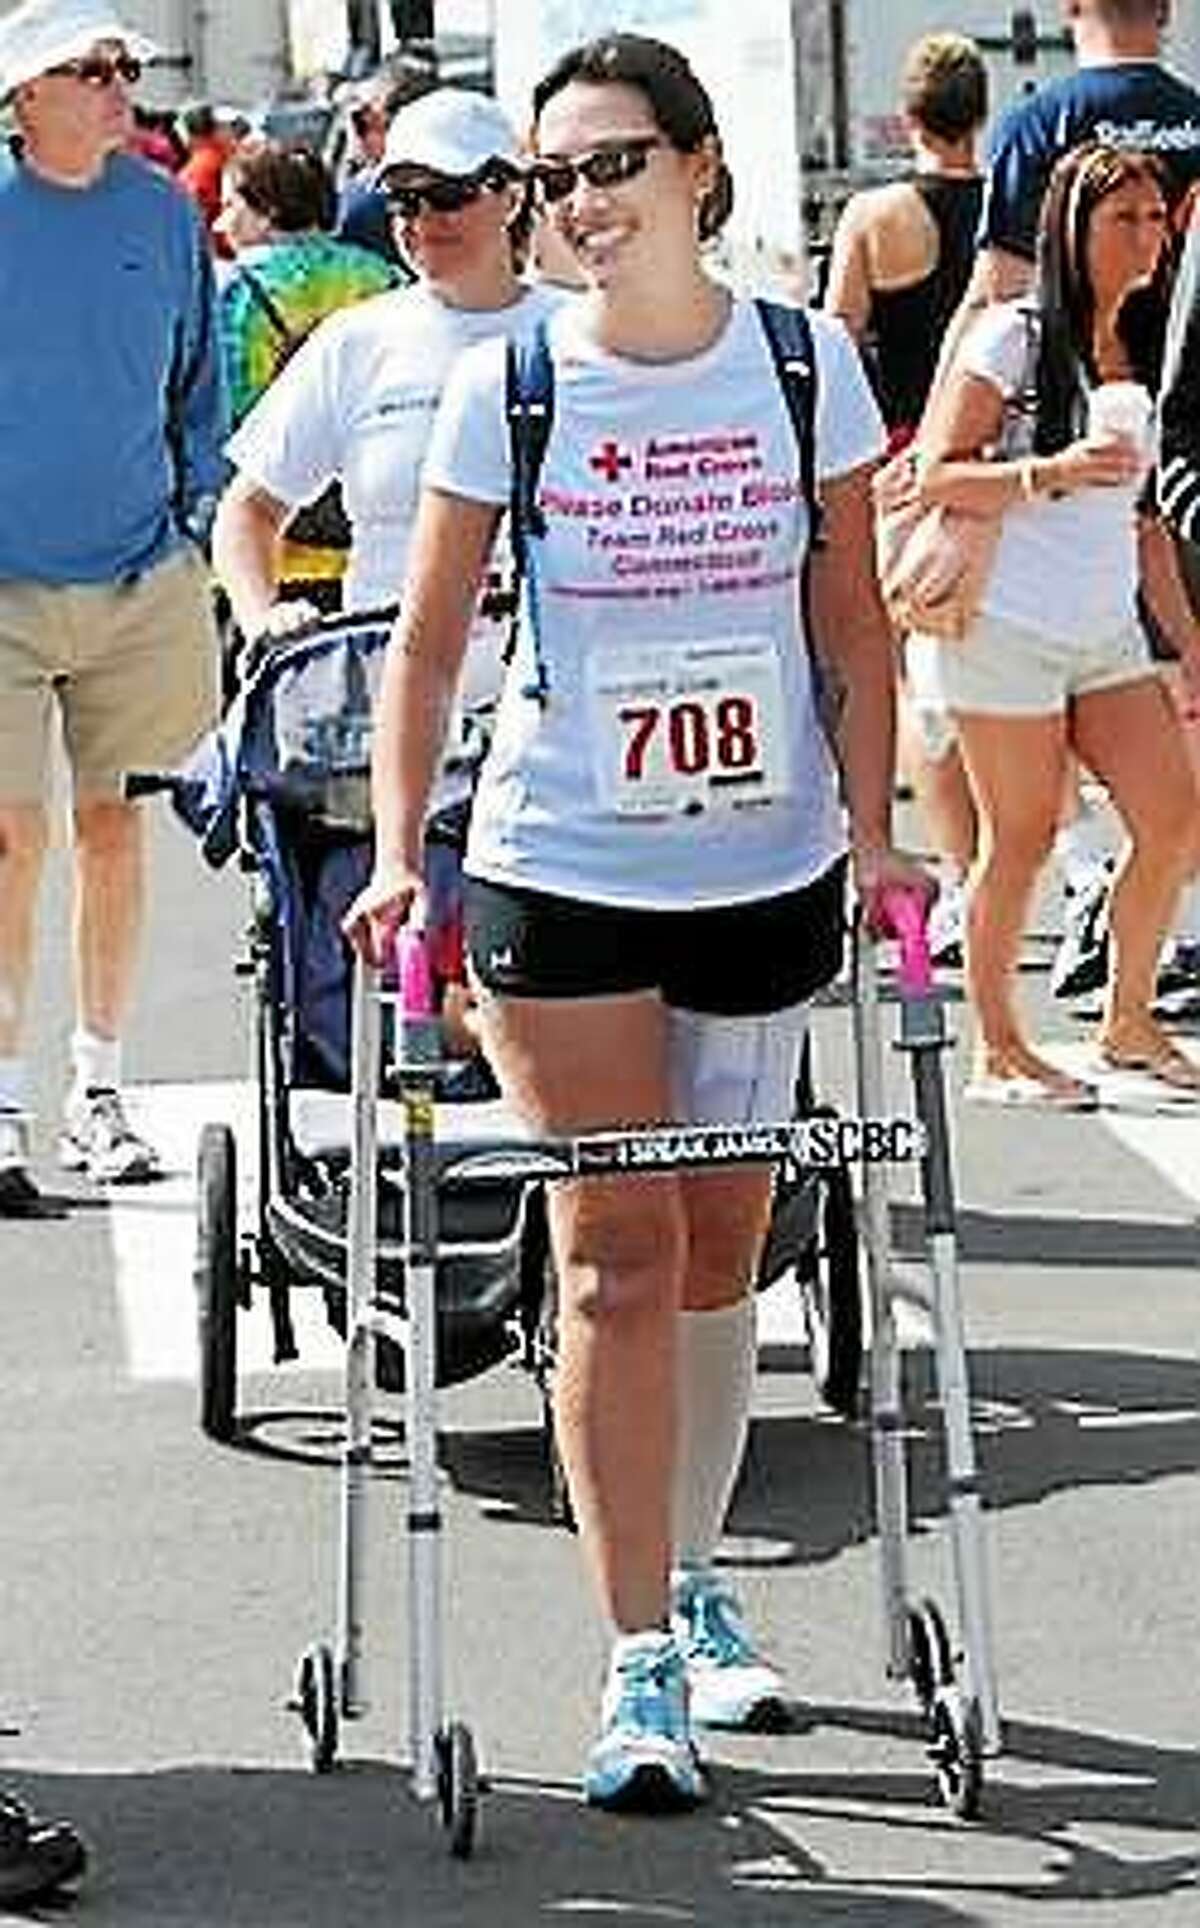 (File photo) Colleen Kelly Alexander of Clinton takes part in the 32nd Annual Branford Road Race in 2012.